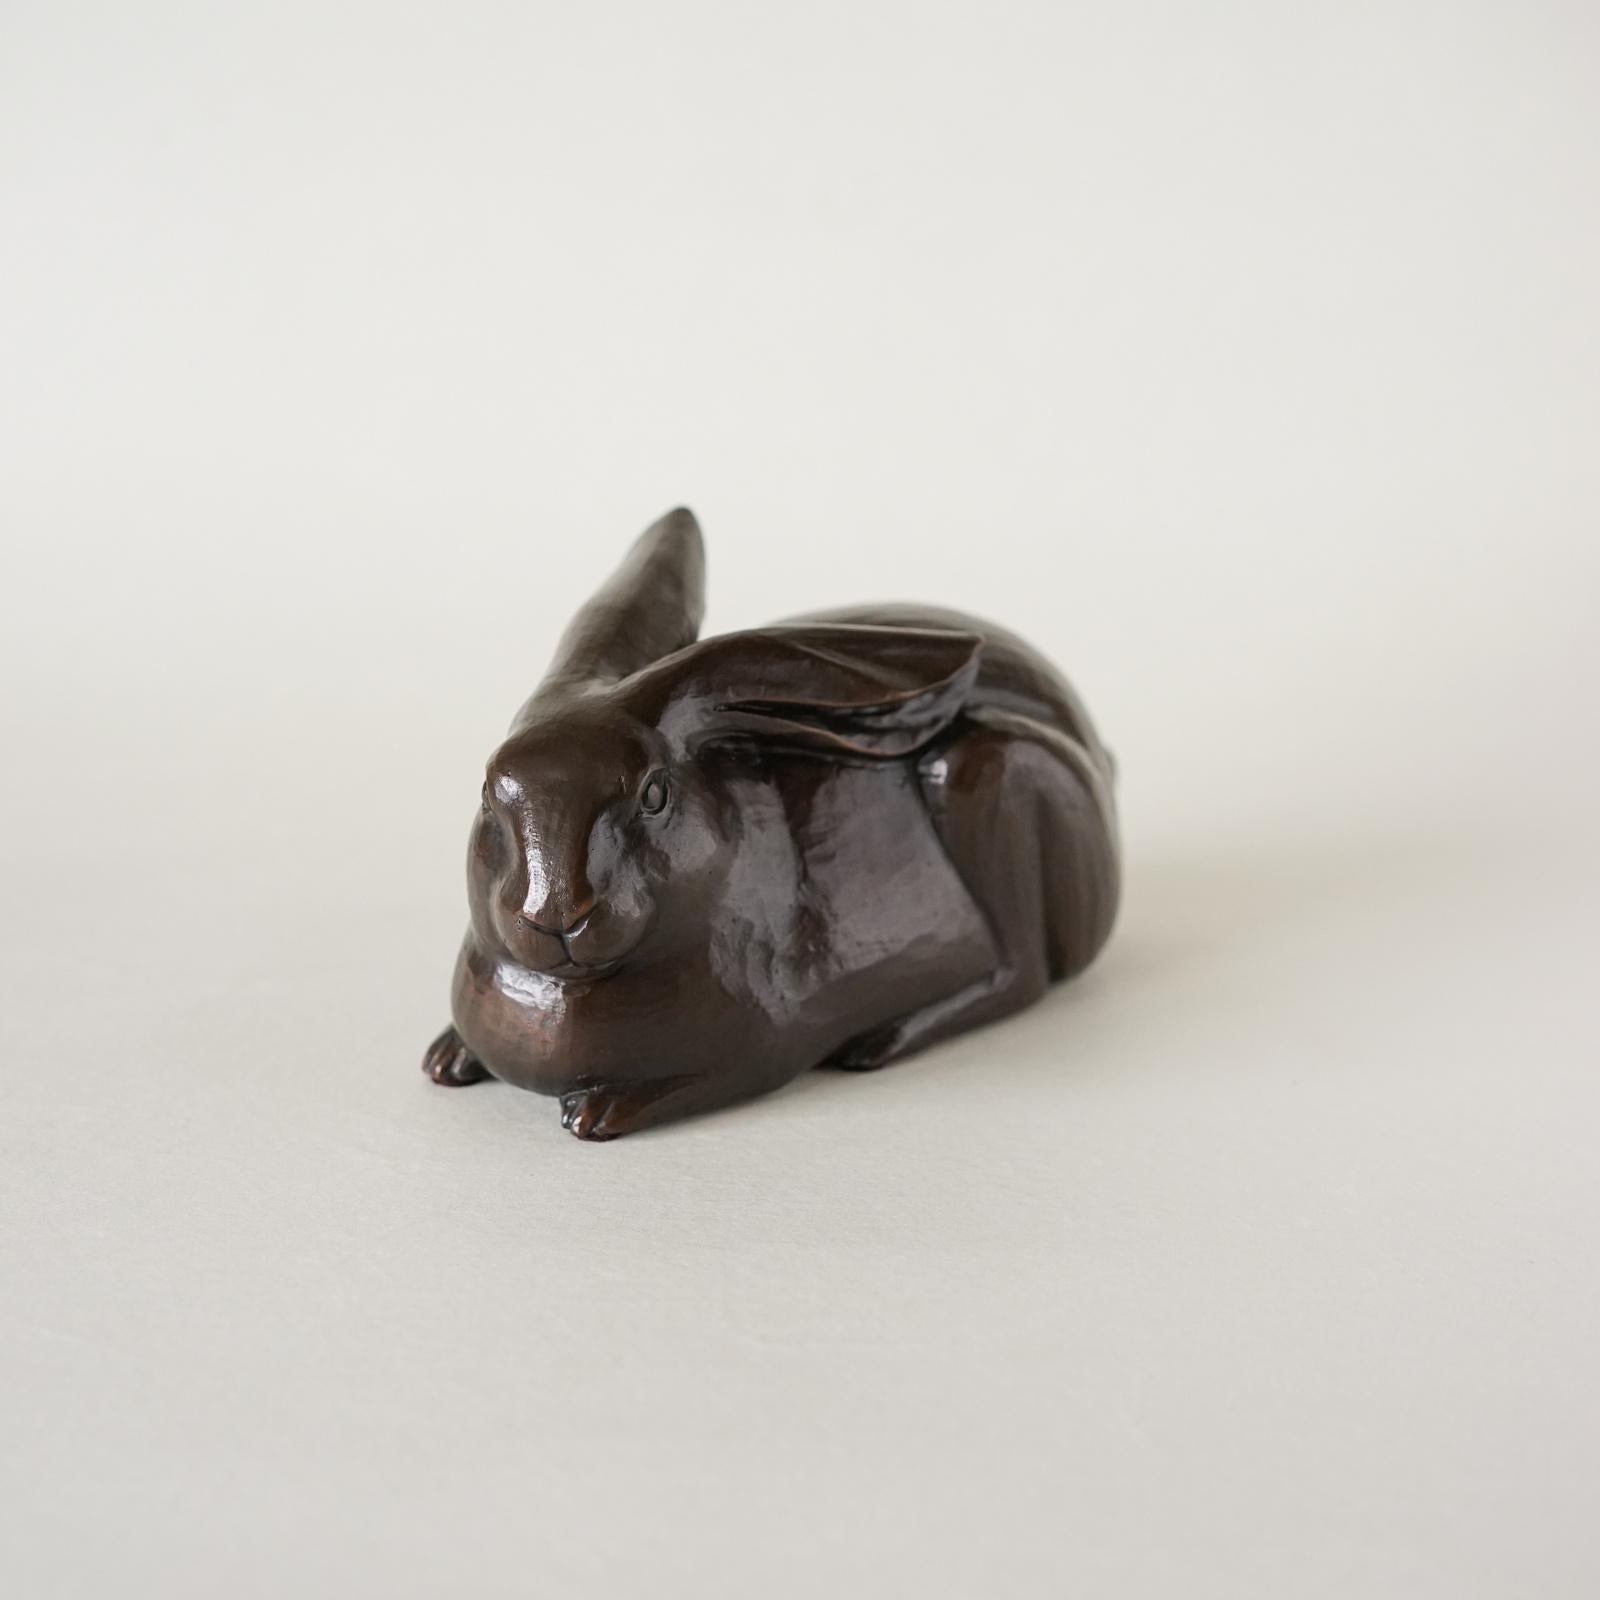 The rabbit is a symbol of wit, prudence and skill, of abundance and good fortune. It is cast in a rich dark bronze patina to make a charming gift for the season, a beautiful object for the desk or vanity that is warm and smooth when held in the